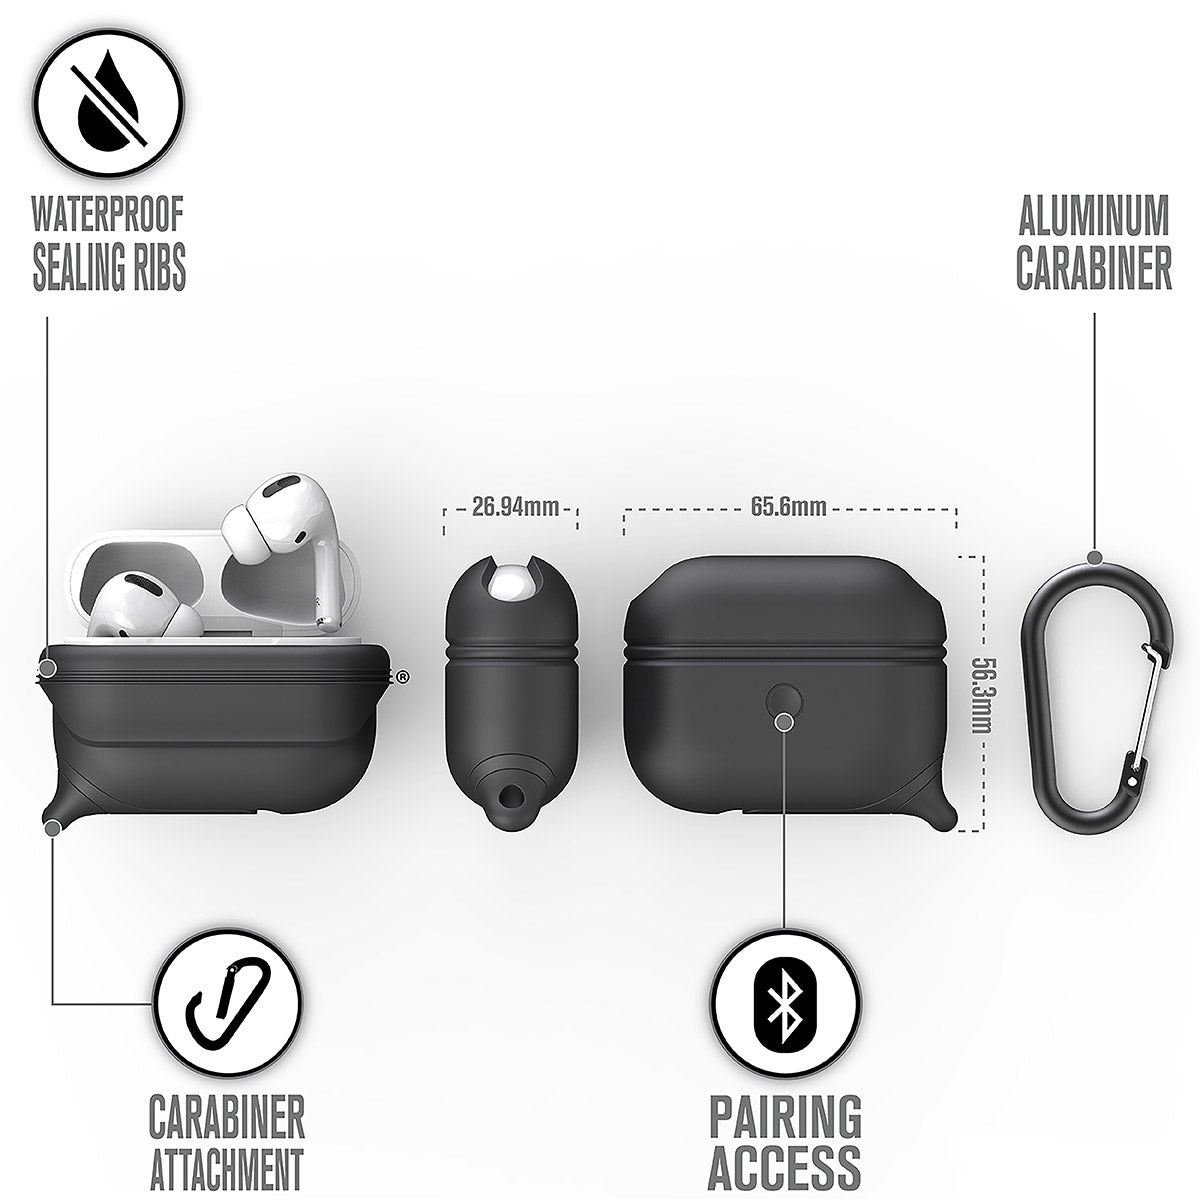 CATAPLAPDPROBLK | catalyst airpods pro gen 2 1 waterproof case carabiner special edition black different views showing the sealing ribs carabiner attachment loop and pairing access text reads waterproof sealing ribs aluminum carabiner carabiner attachment pairing access